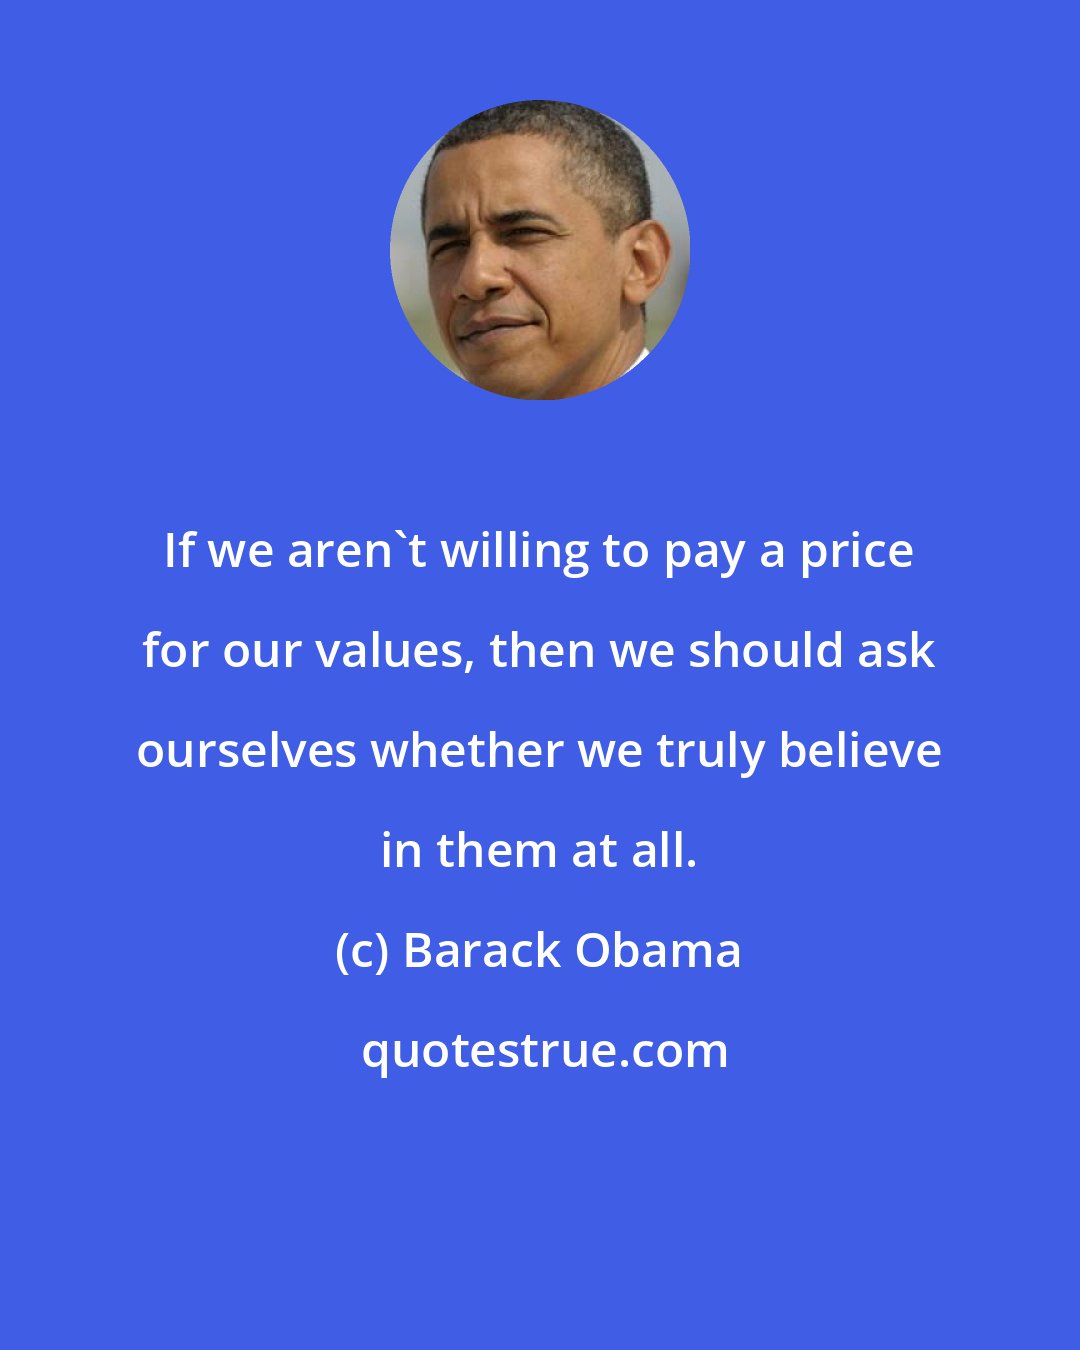 Barack Obama: If we aren't willing to pay a price for our values, then we should ask ourselves whether we truly believe in them at all.